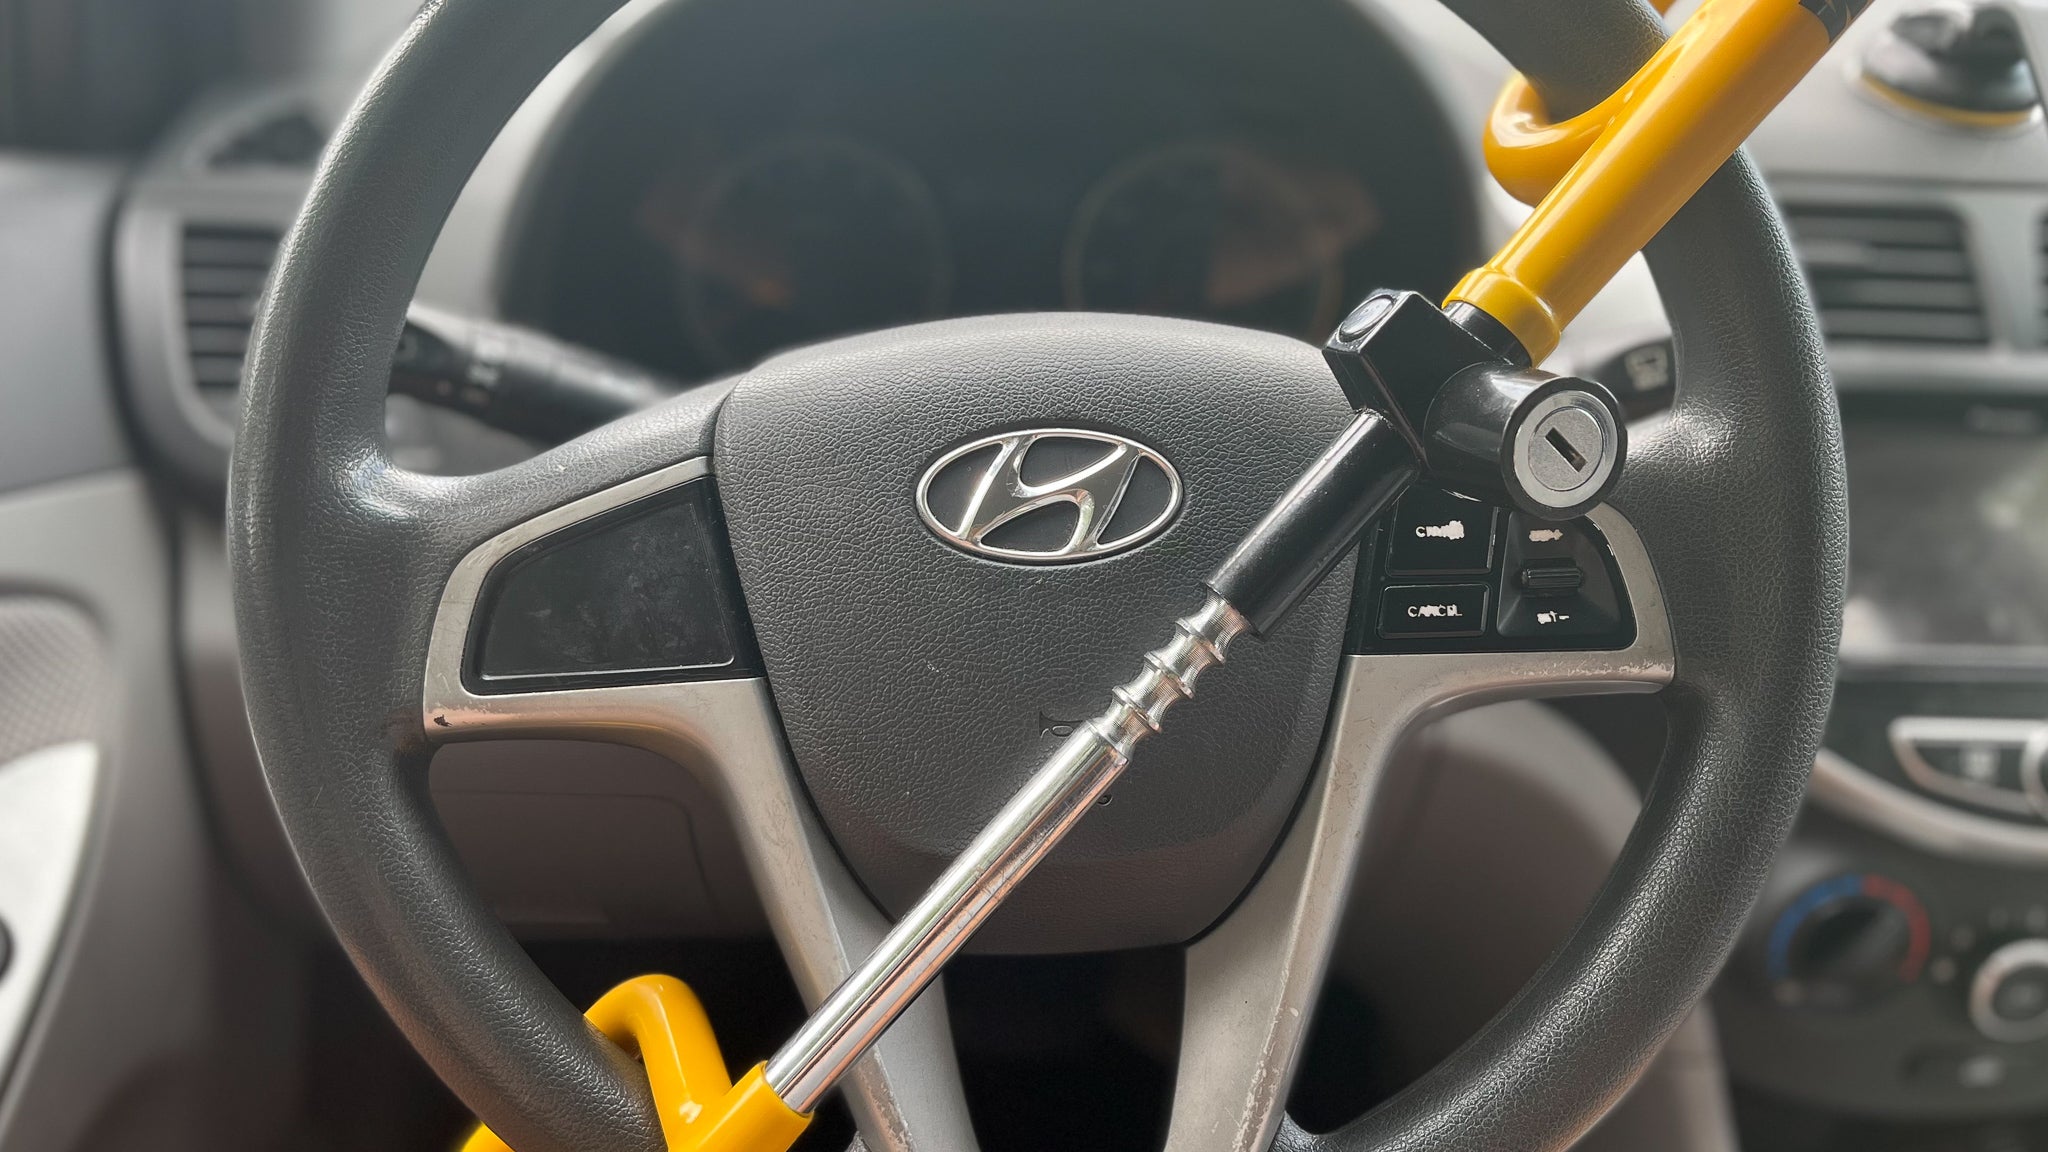 What Causes A Steering Wheel To Lock While Driving?